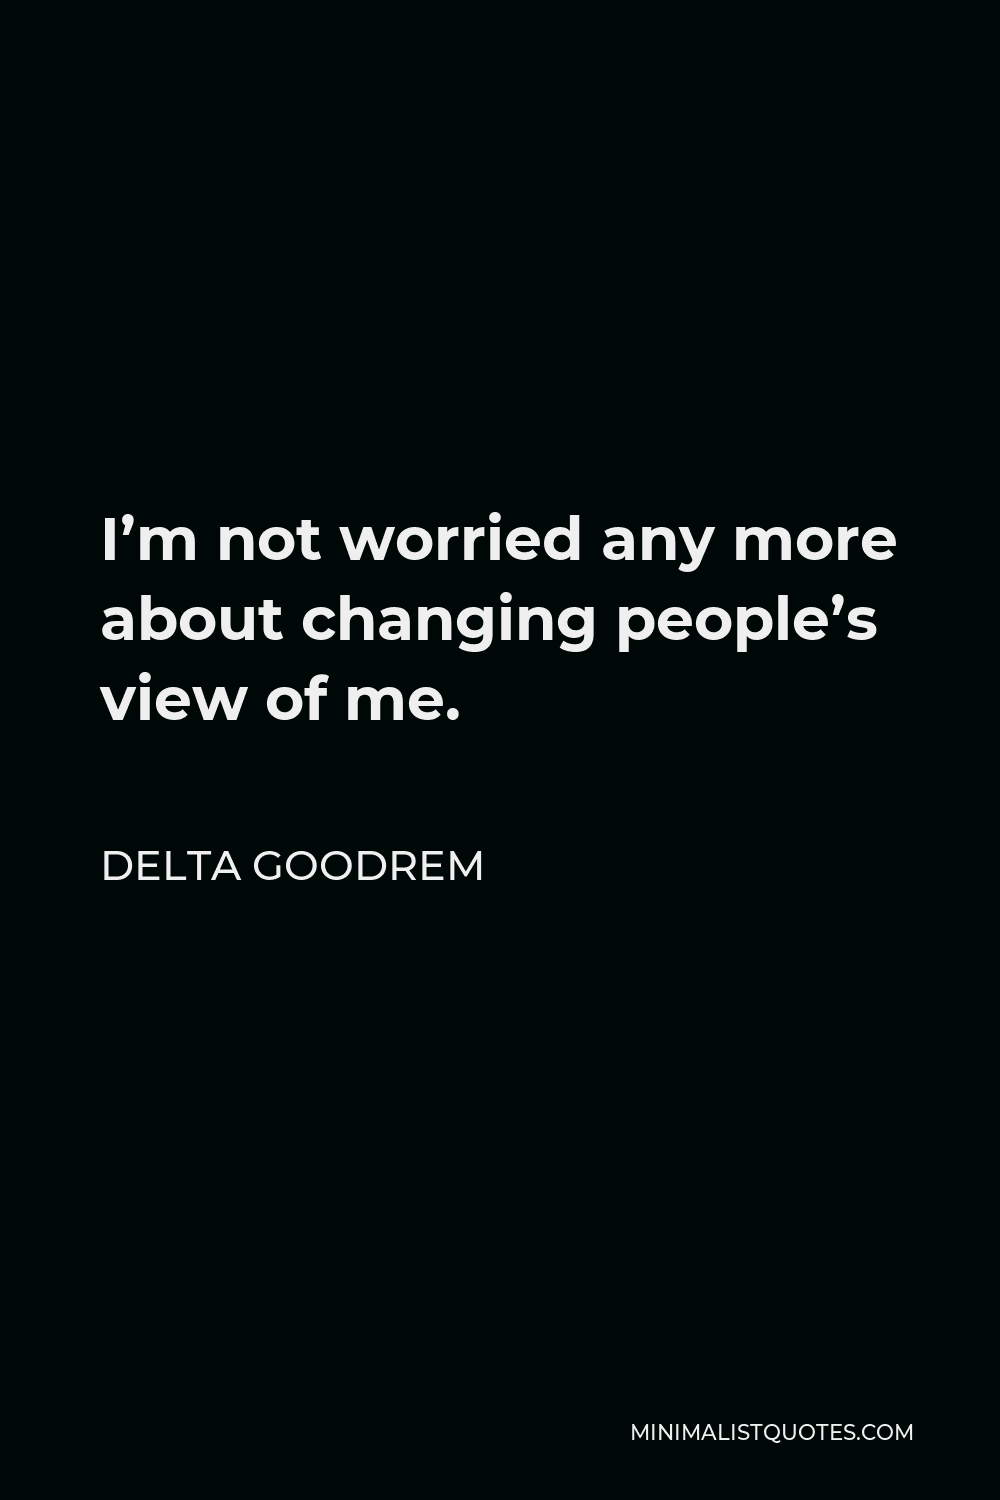 Delta Goodrem Quote - I’m not worried any more about changing people’s view of me.